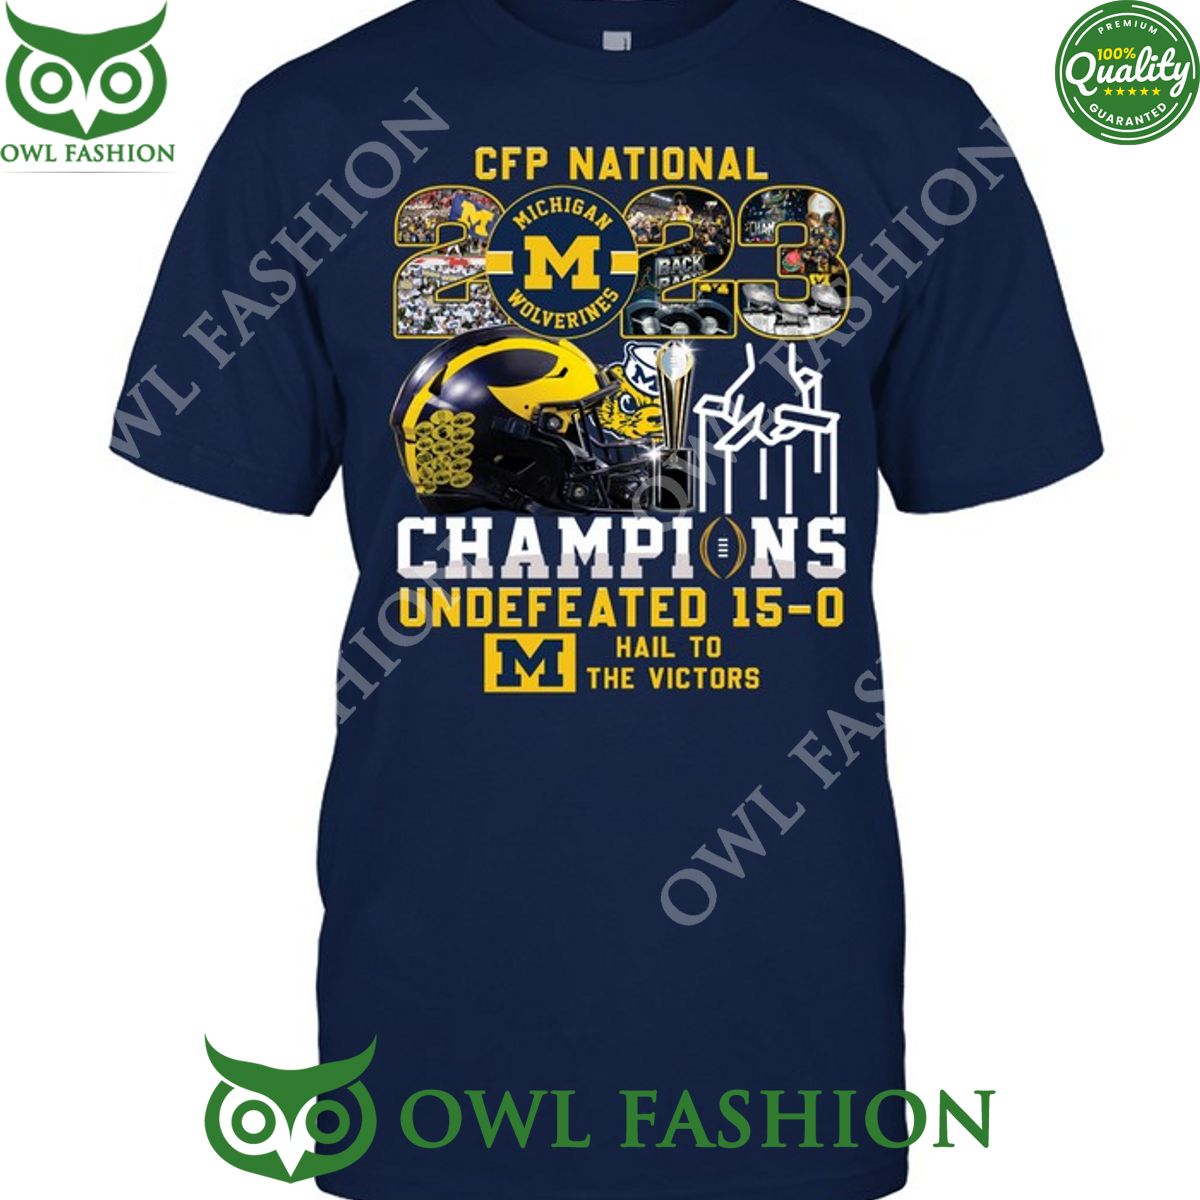 cfp national champs michigan wolverines vs everybody undefeated 15 0 hail to the victors t shirt 1 DxilU.jpg